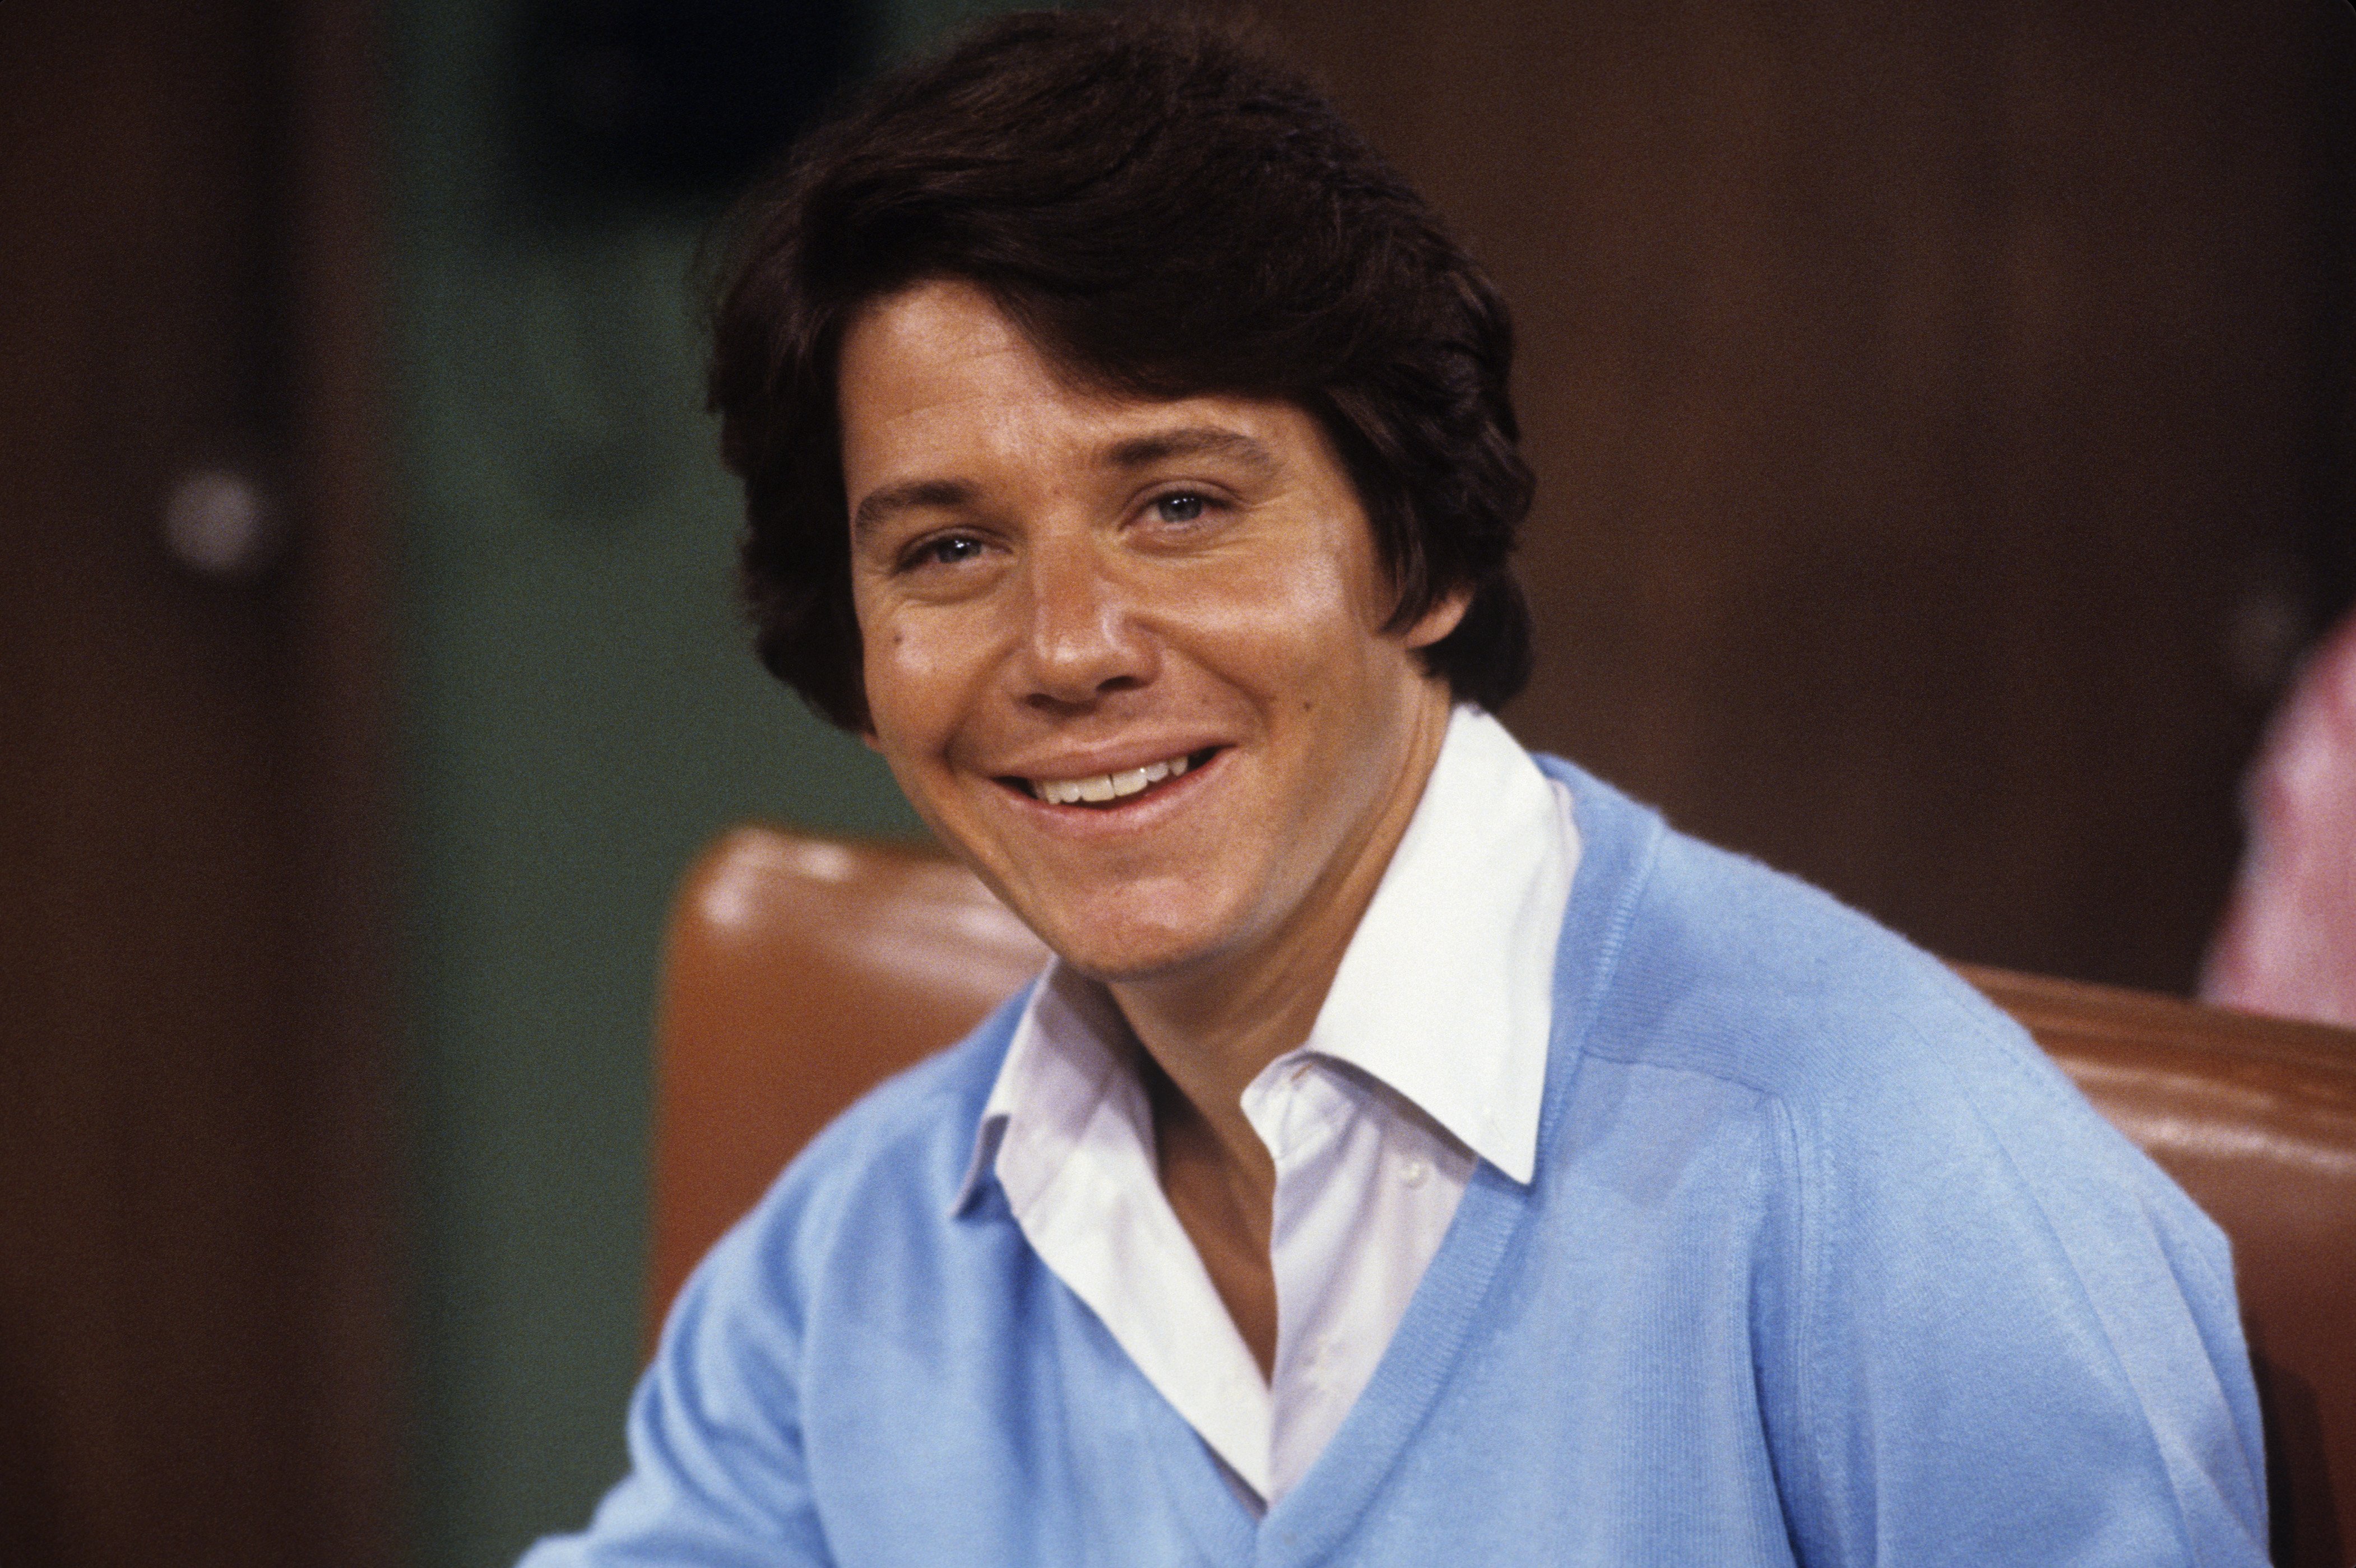 Anson Williams on "Happy Days" in 1979. | Source: Getty Images